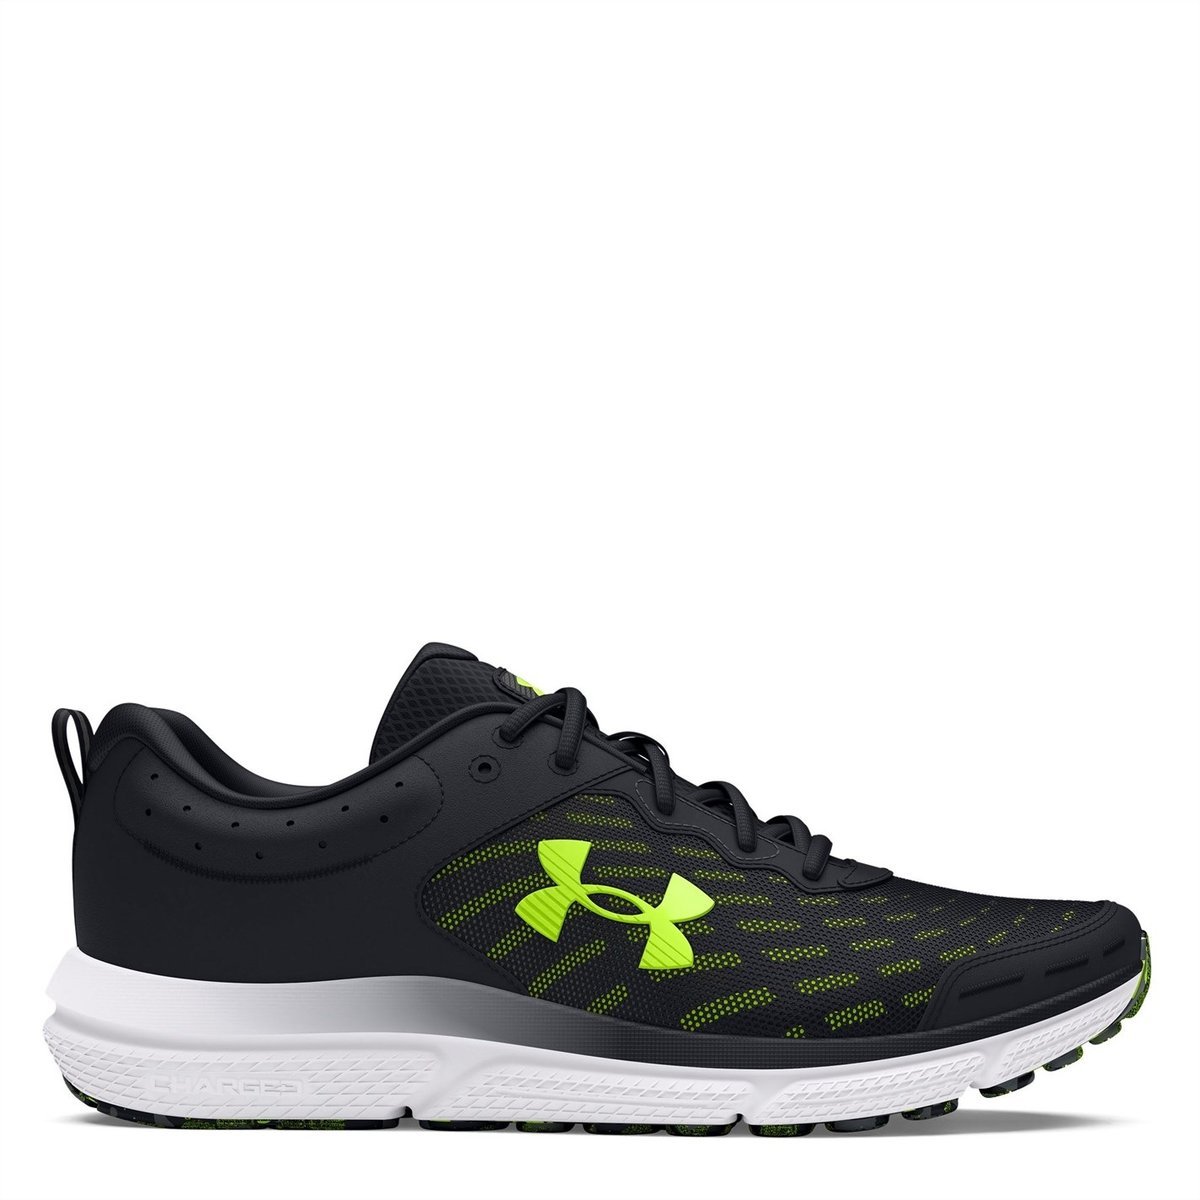 Under Armour Charged Assert 10 White Orange Men Road Running Shoes